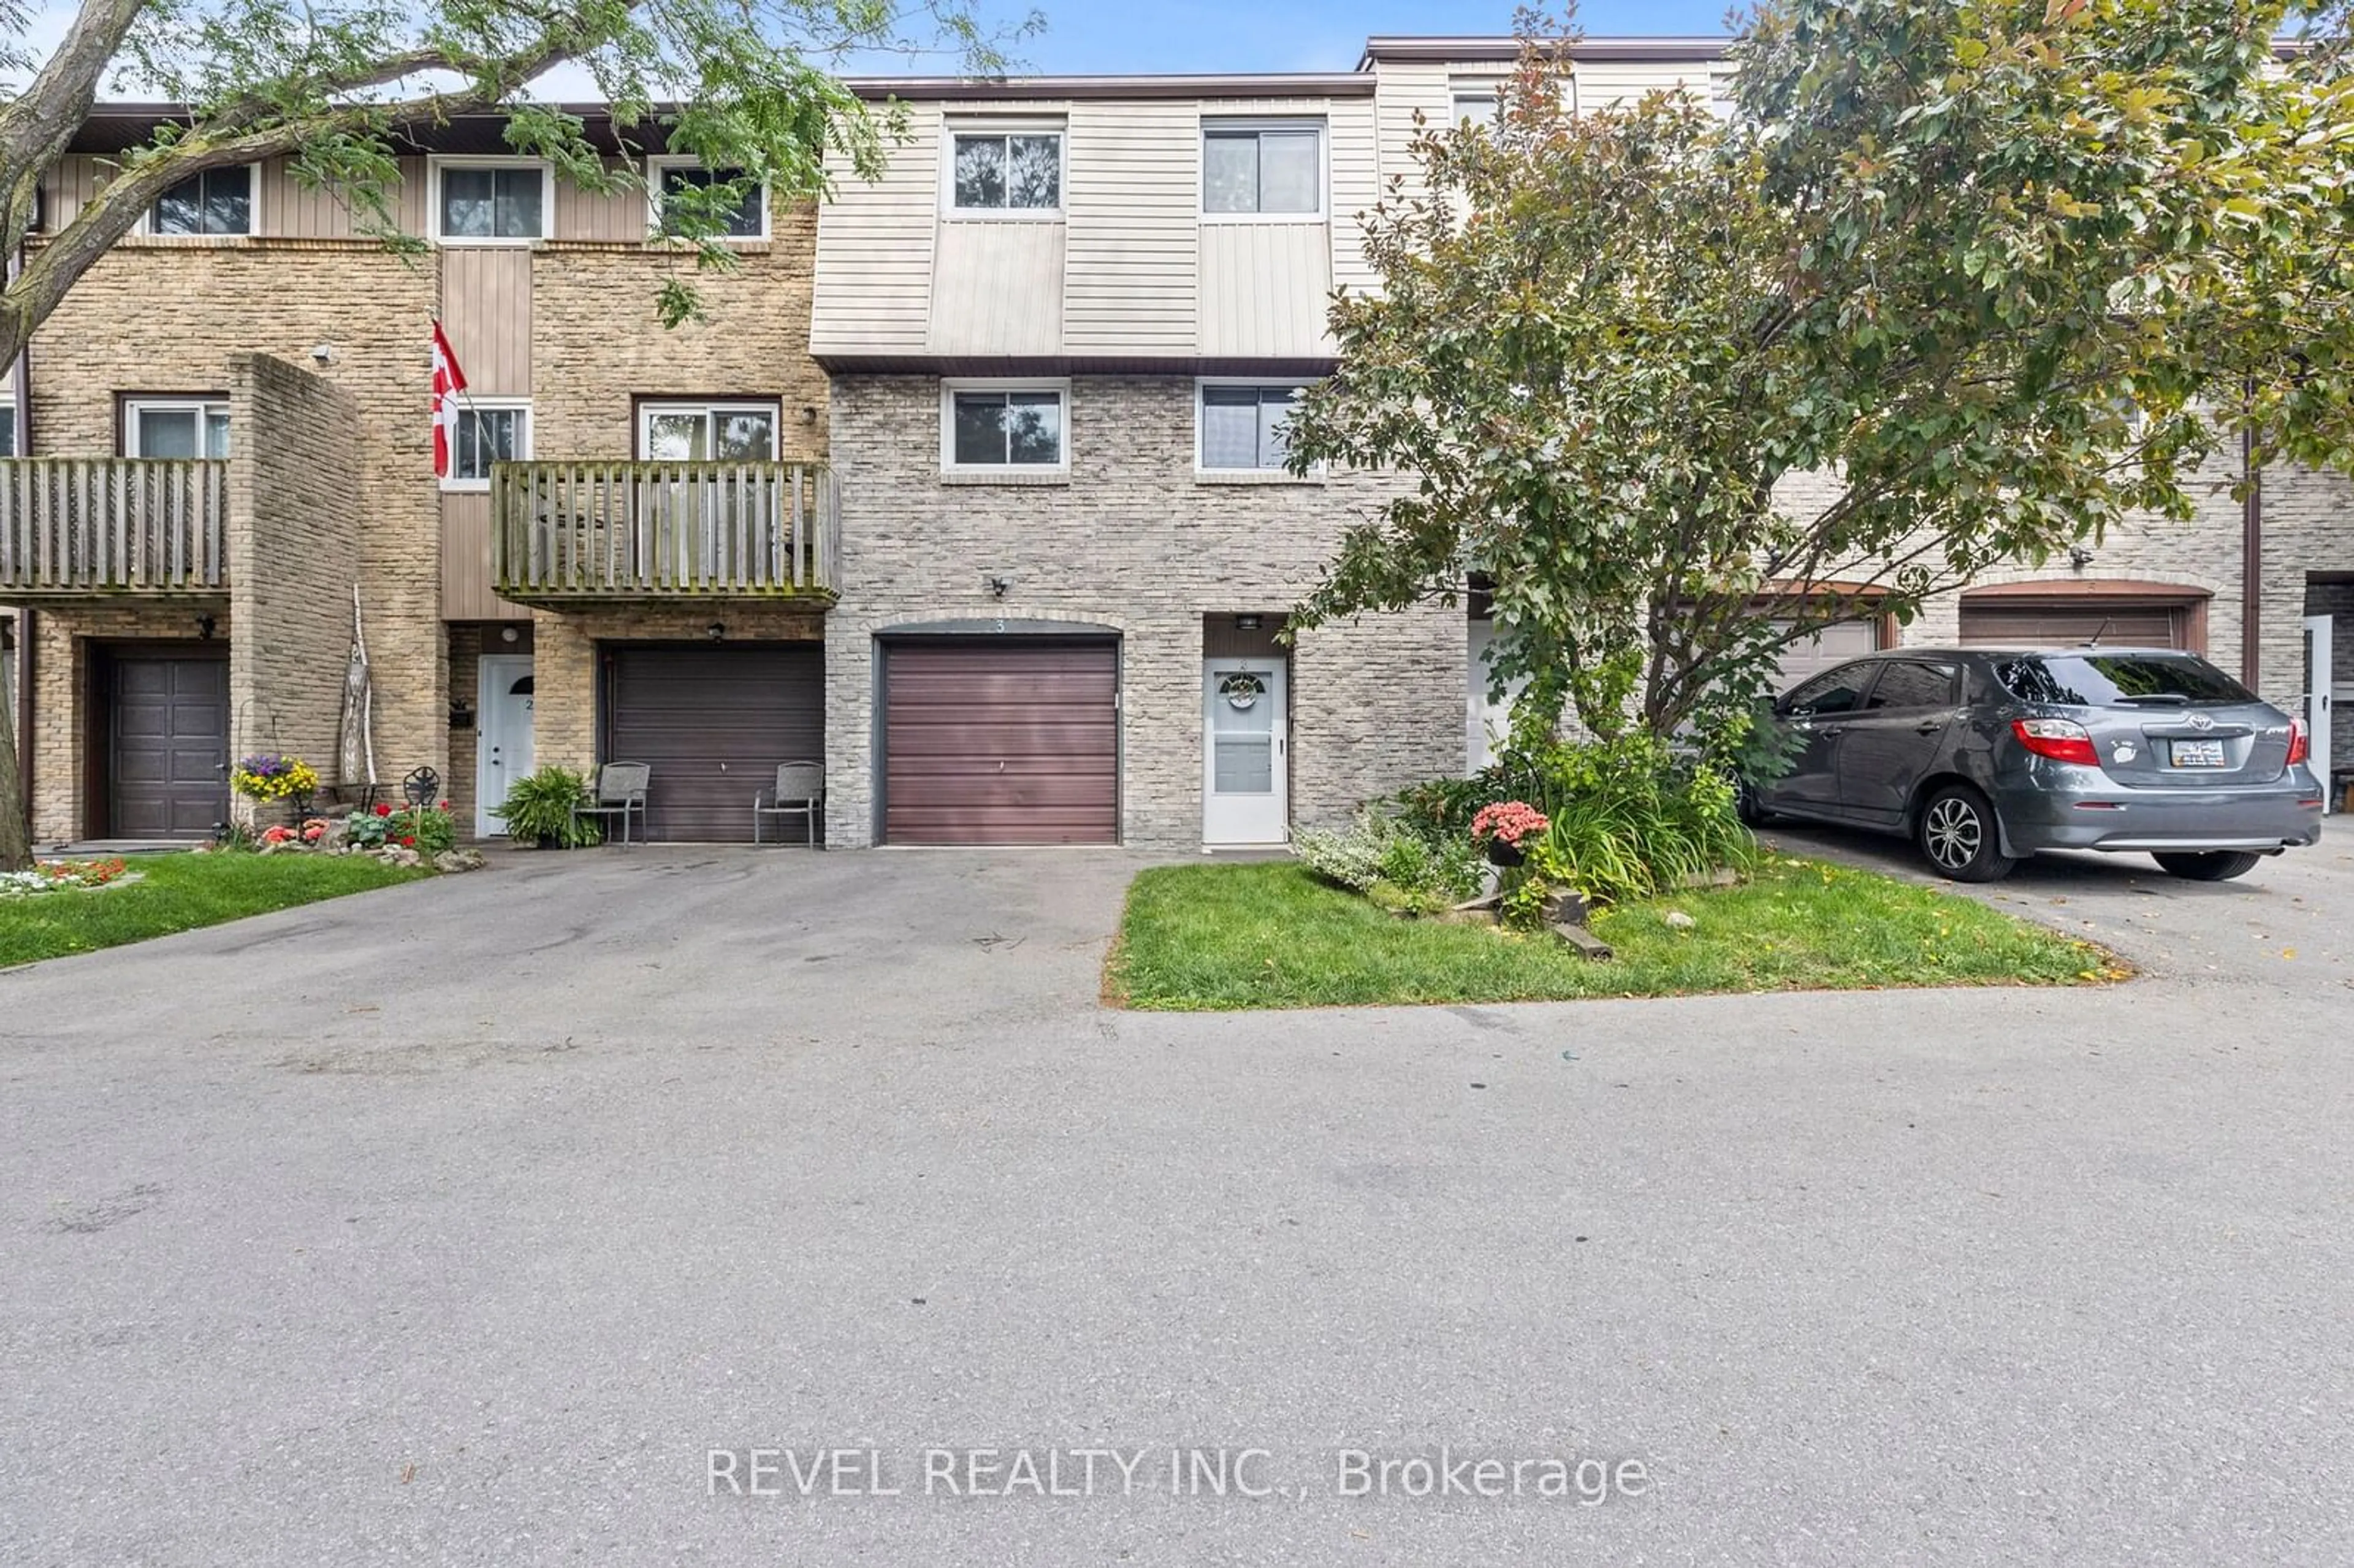 A pic from exterior of the house or condo for 985 Limeridge Rd #3, Hamilton Ontario L8W 1X9